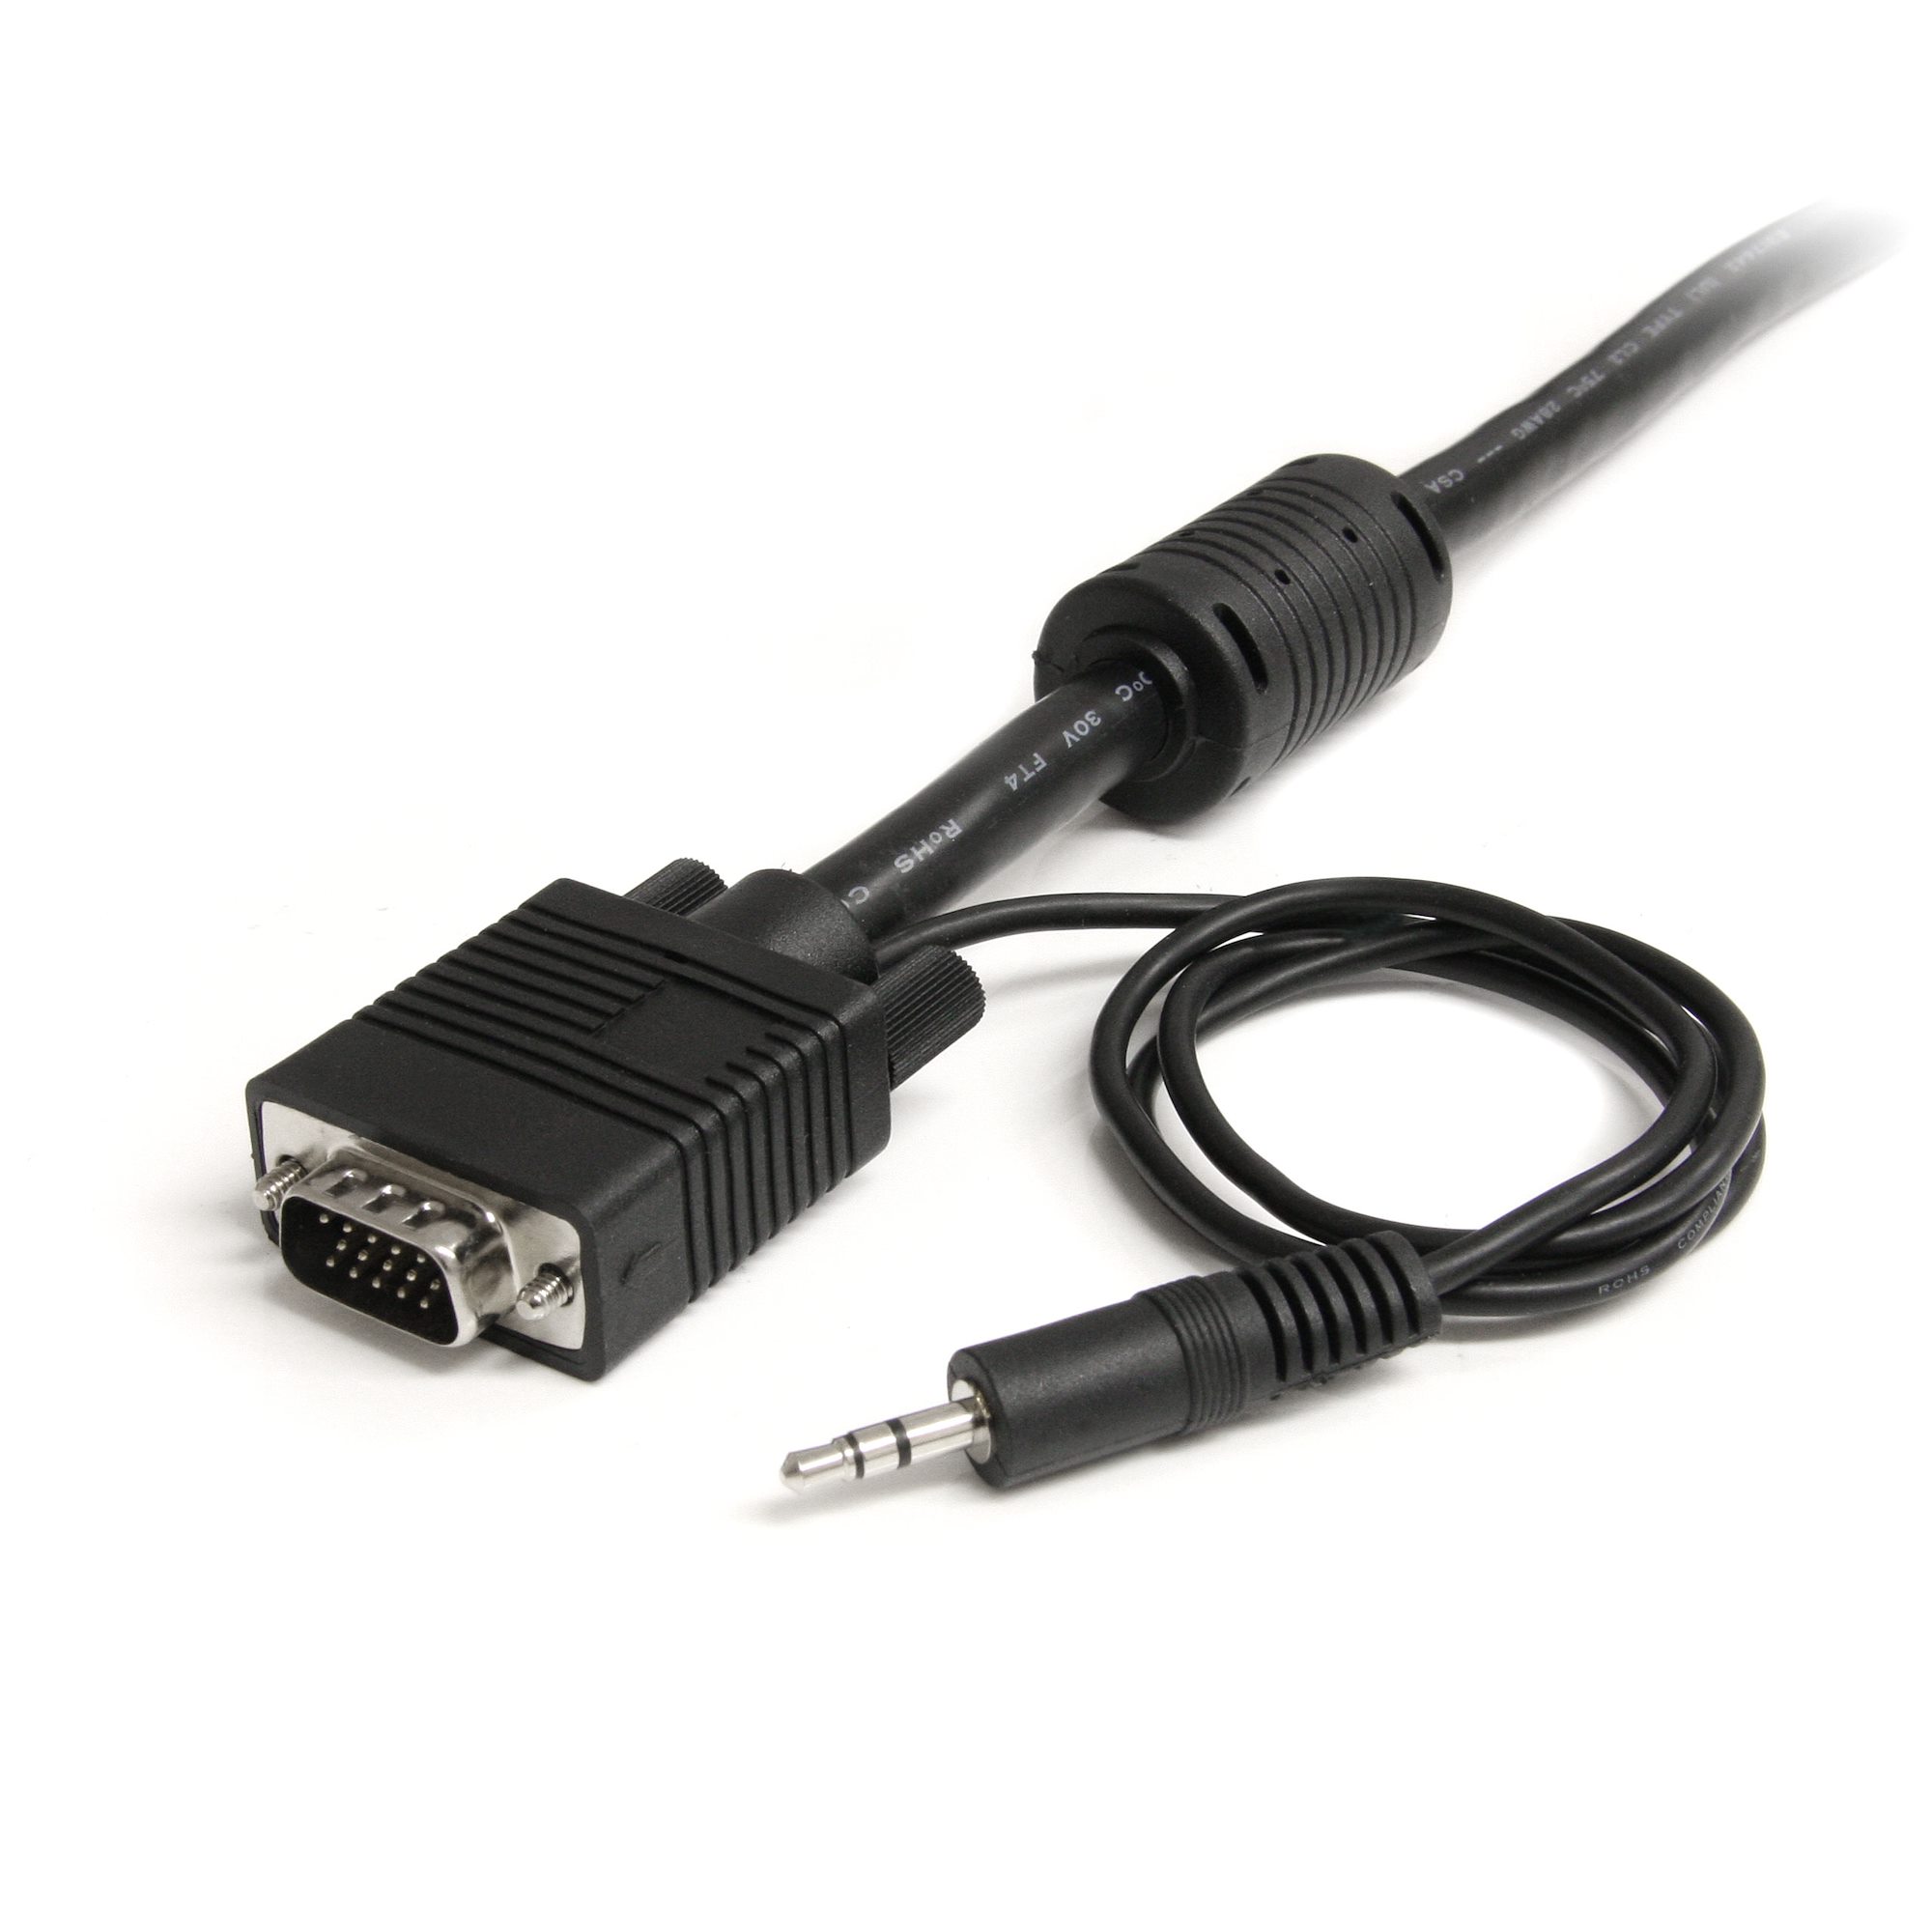 15FT VGA SVGA M/M Monitor Cable with 3.5mm Audio 15' NEW FAST SHIP 